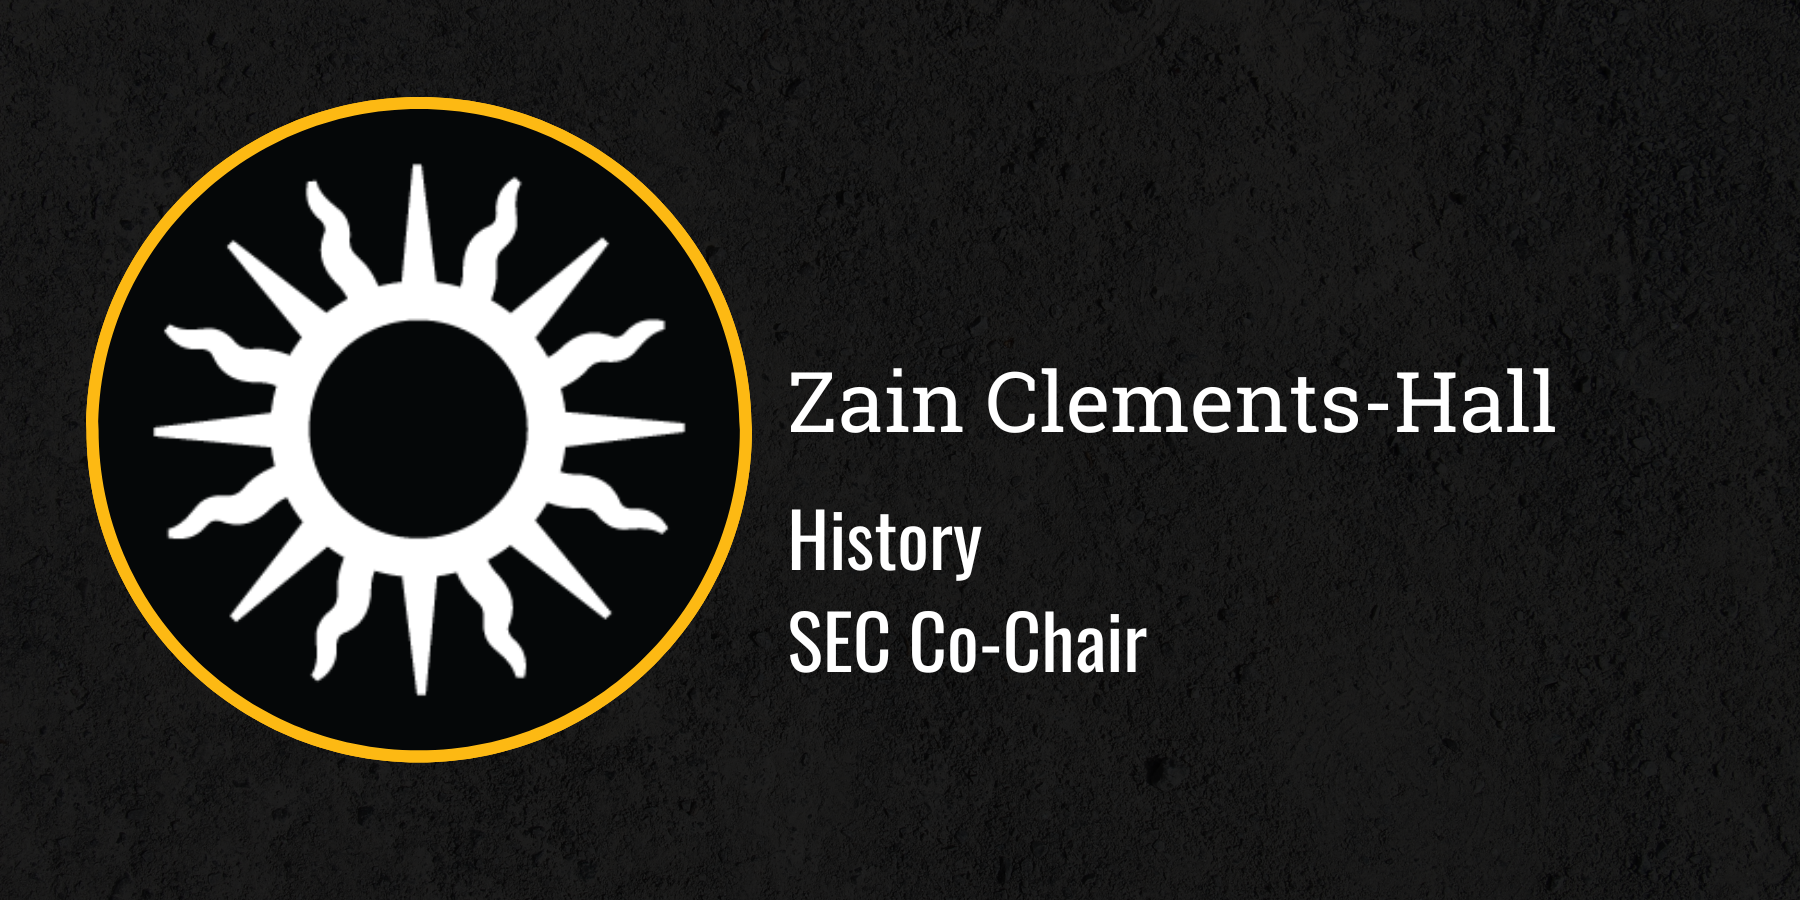 Zain Clements-Hall
History
SEC Co-Chair